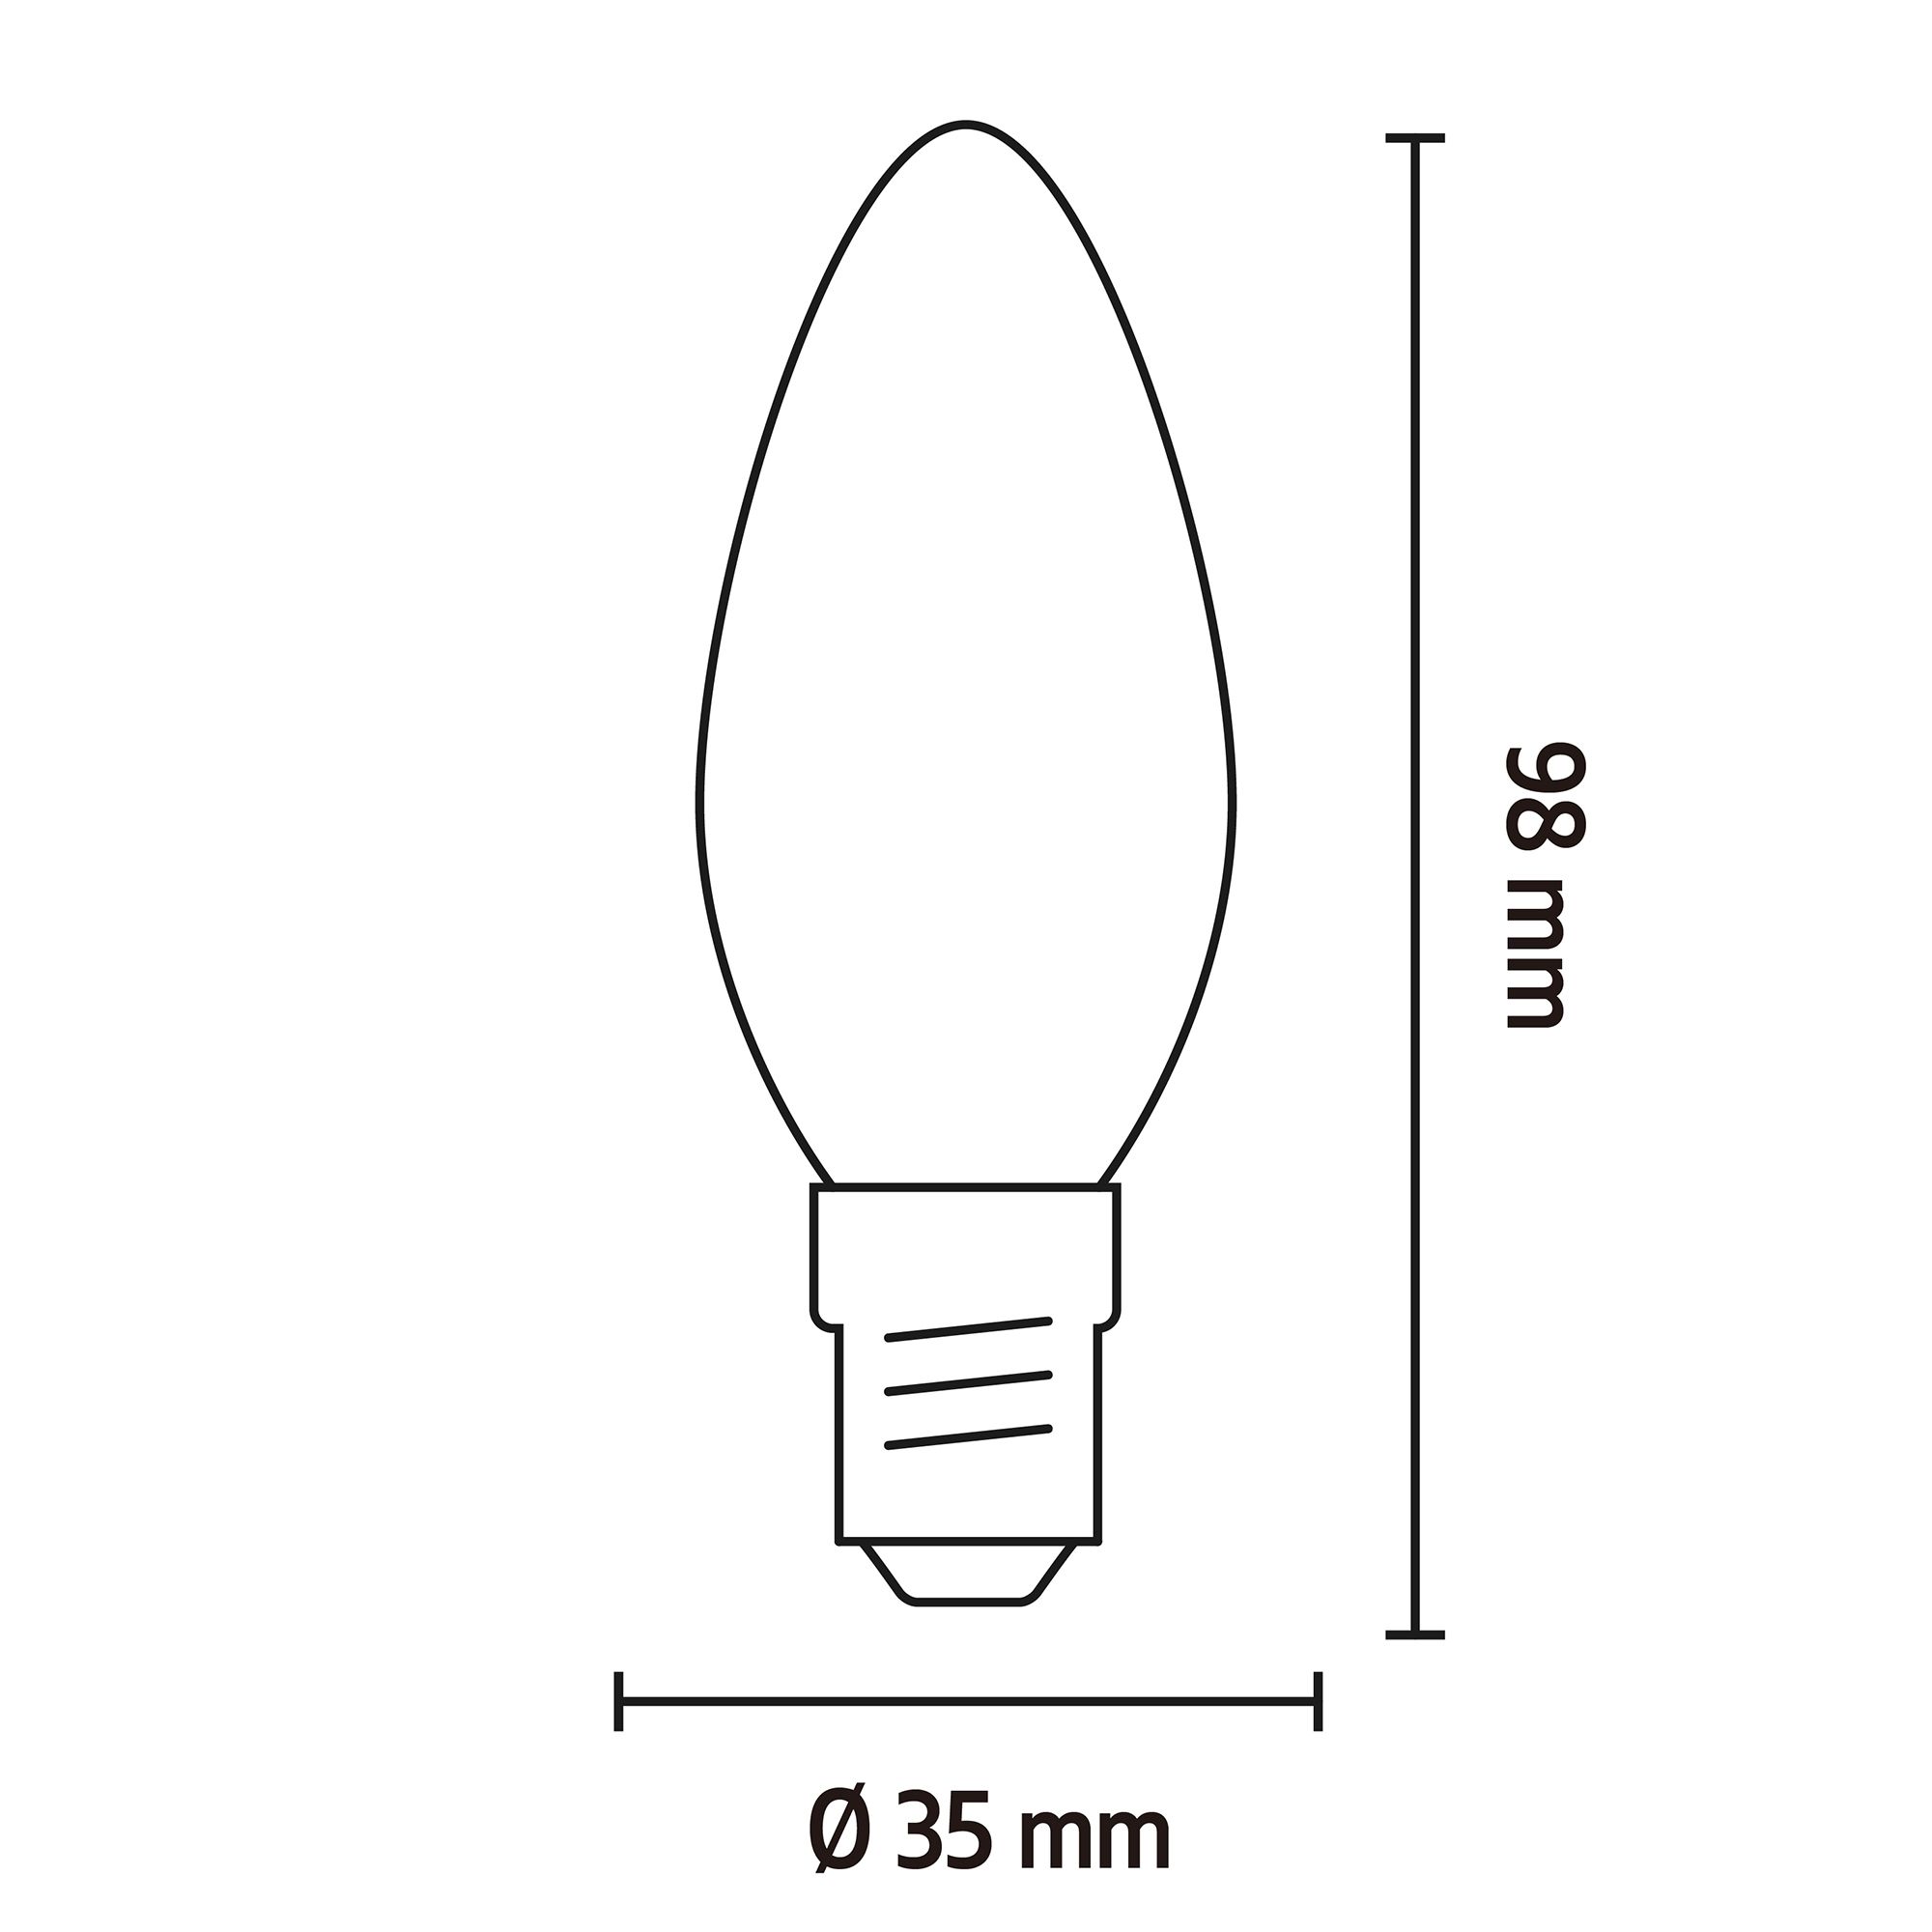 CALEX E14 4W 450lm White Candle Warm white LED Dimmable Filament Light bulb